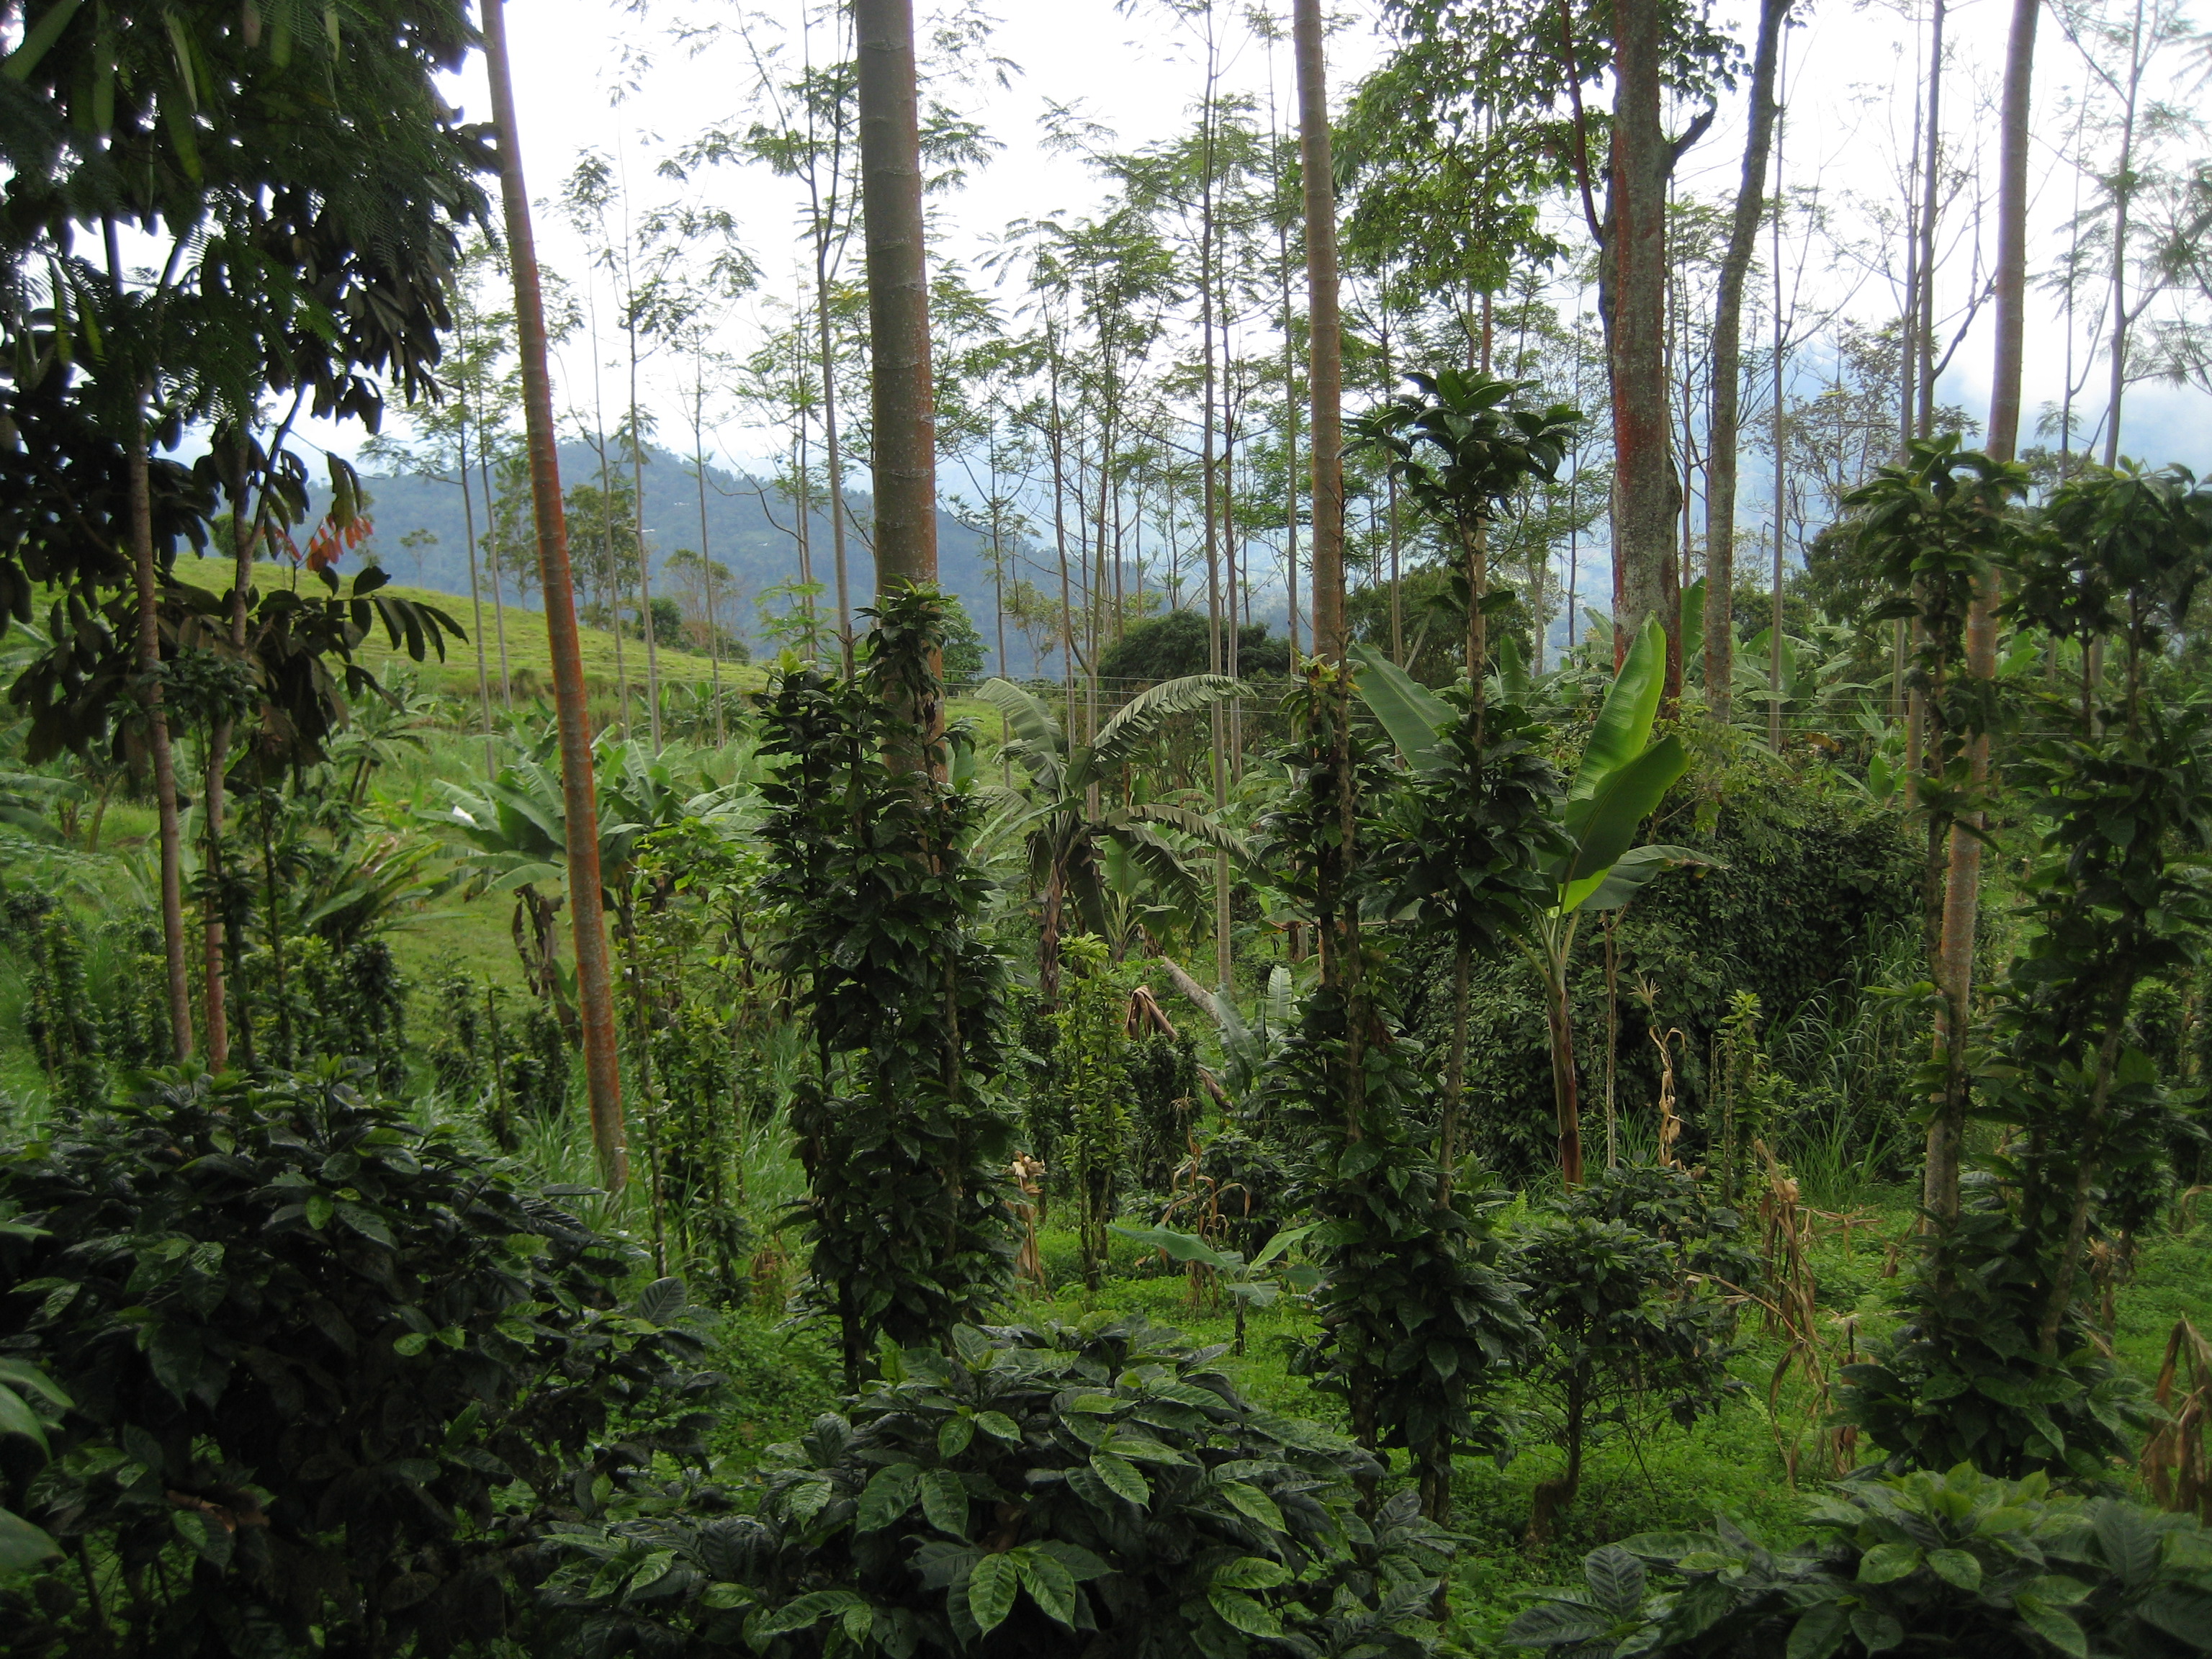 Shade-grown coffee plants are intermixed with other rainforest forest.